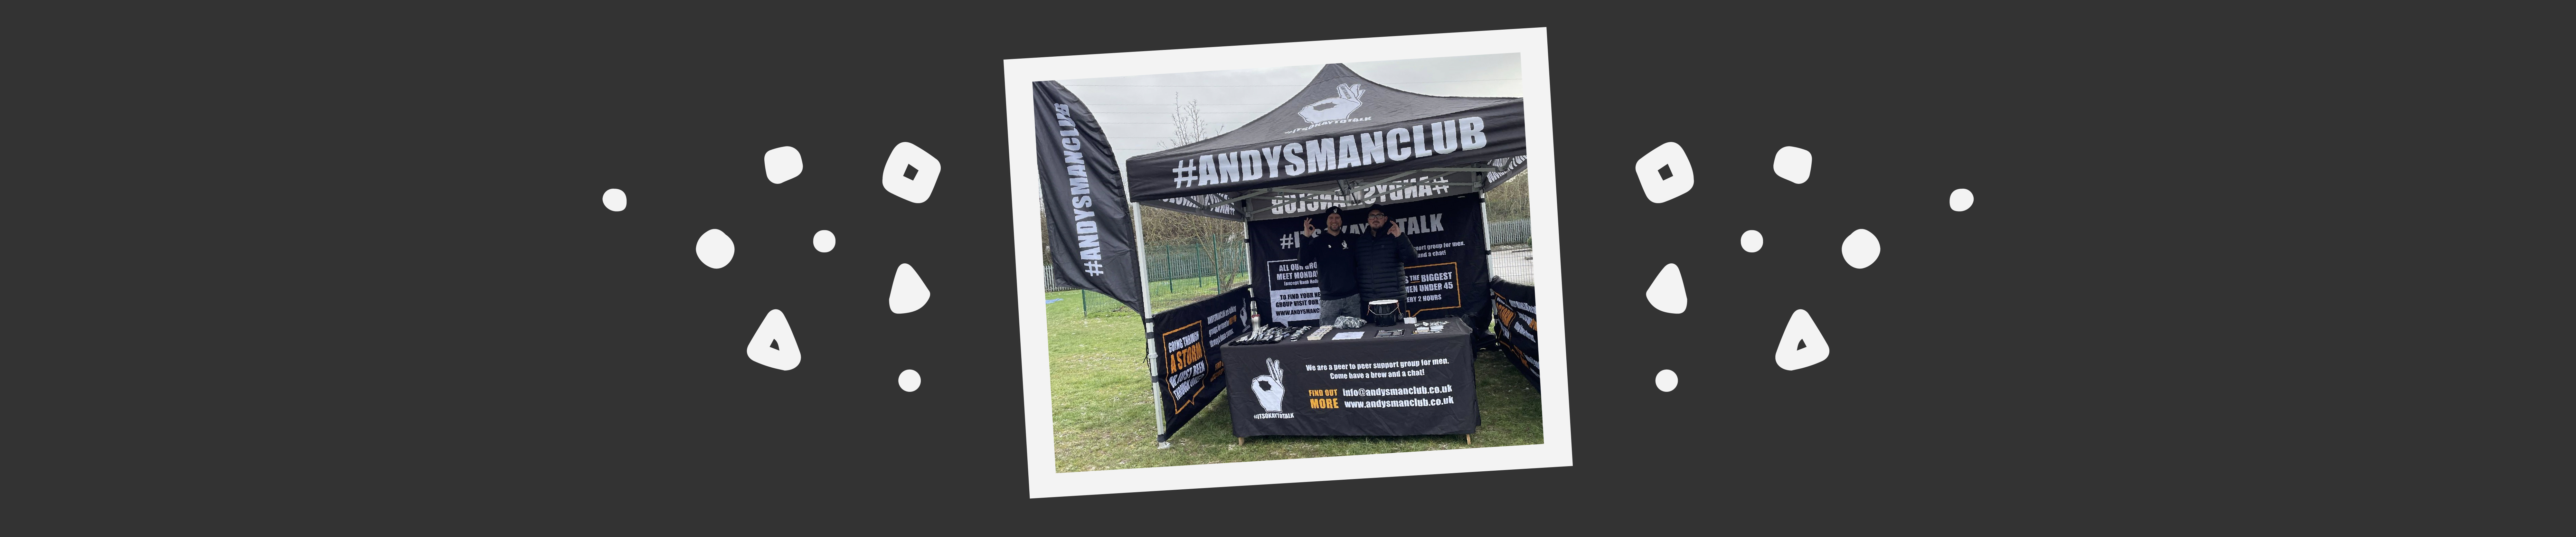 ANDYSMANCLUB volunteers stood under a branded tent at an outdoor event